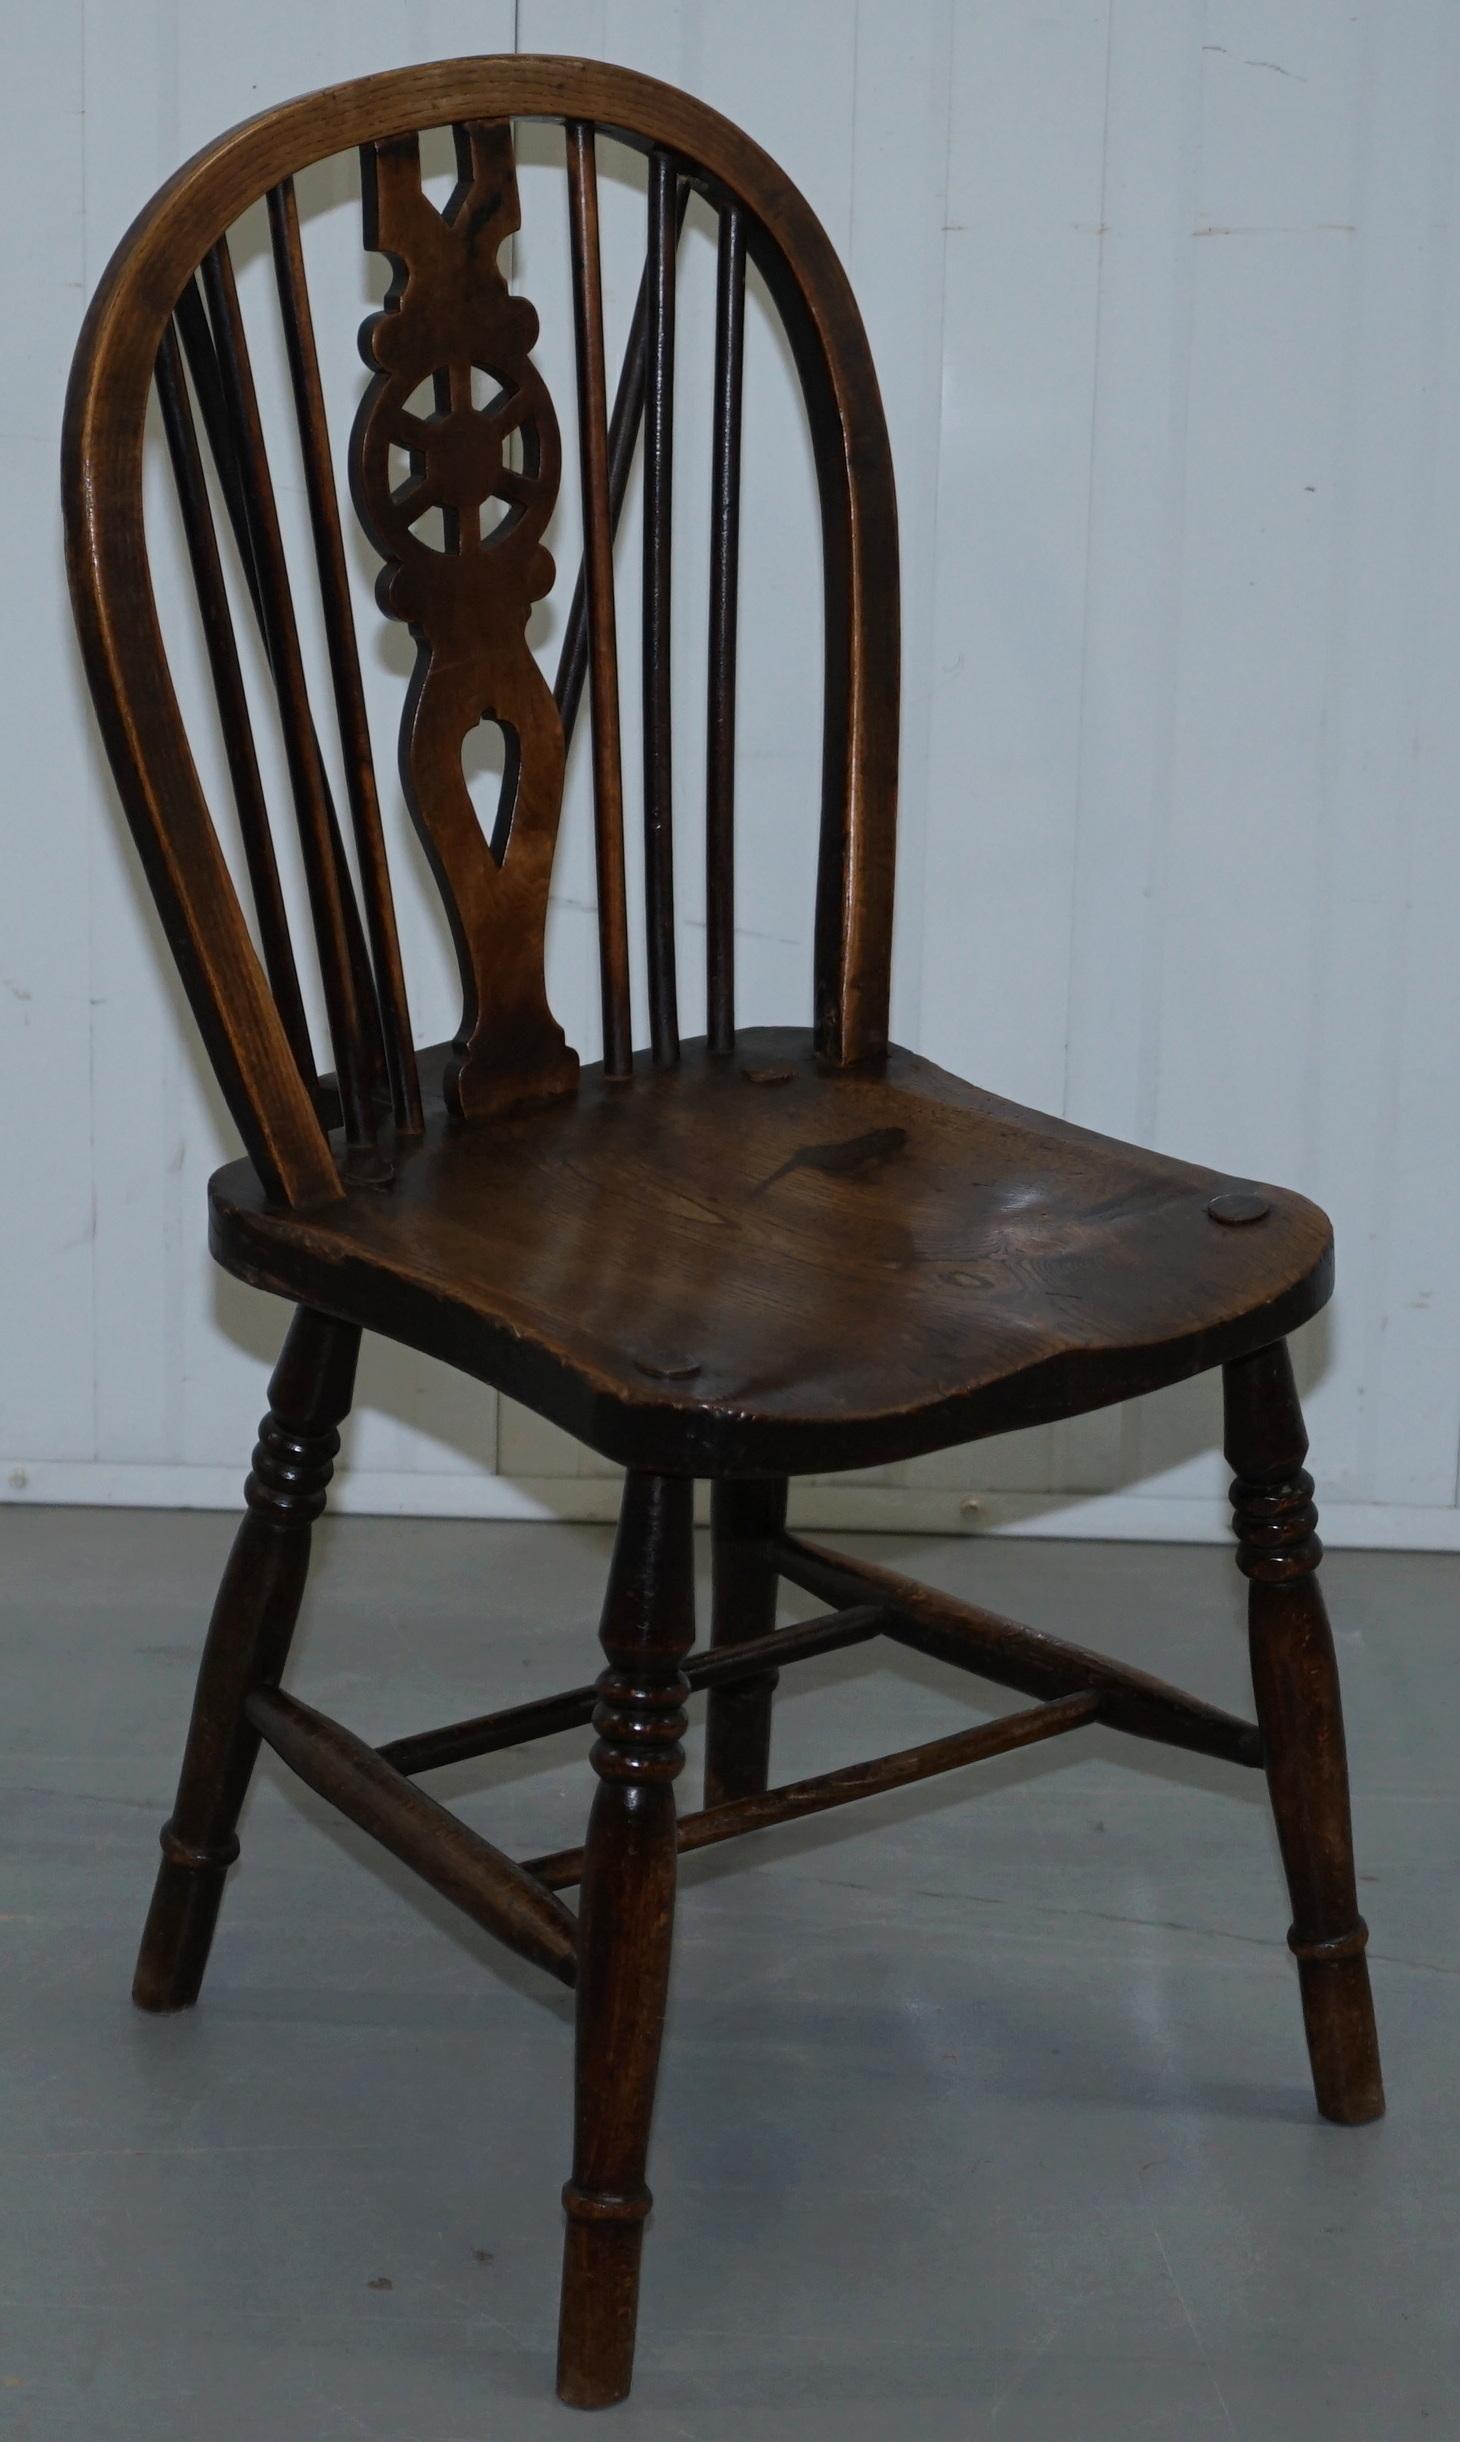 Rare Set of 6 Victorian 1840 Hoop Back Windsor Chairs High Wycombe, England 11